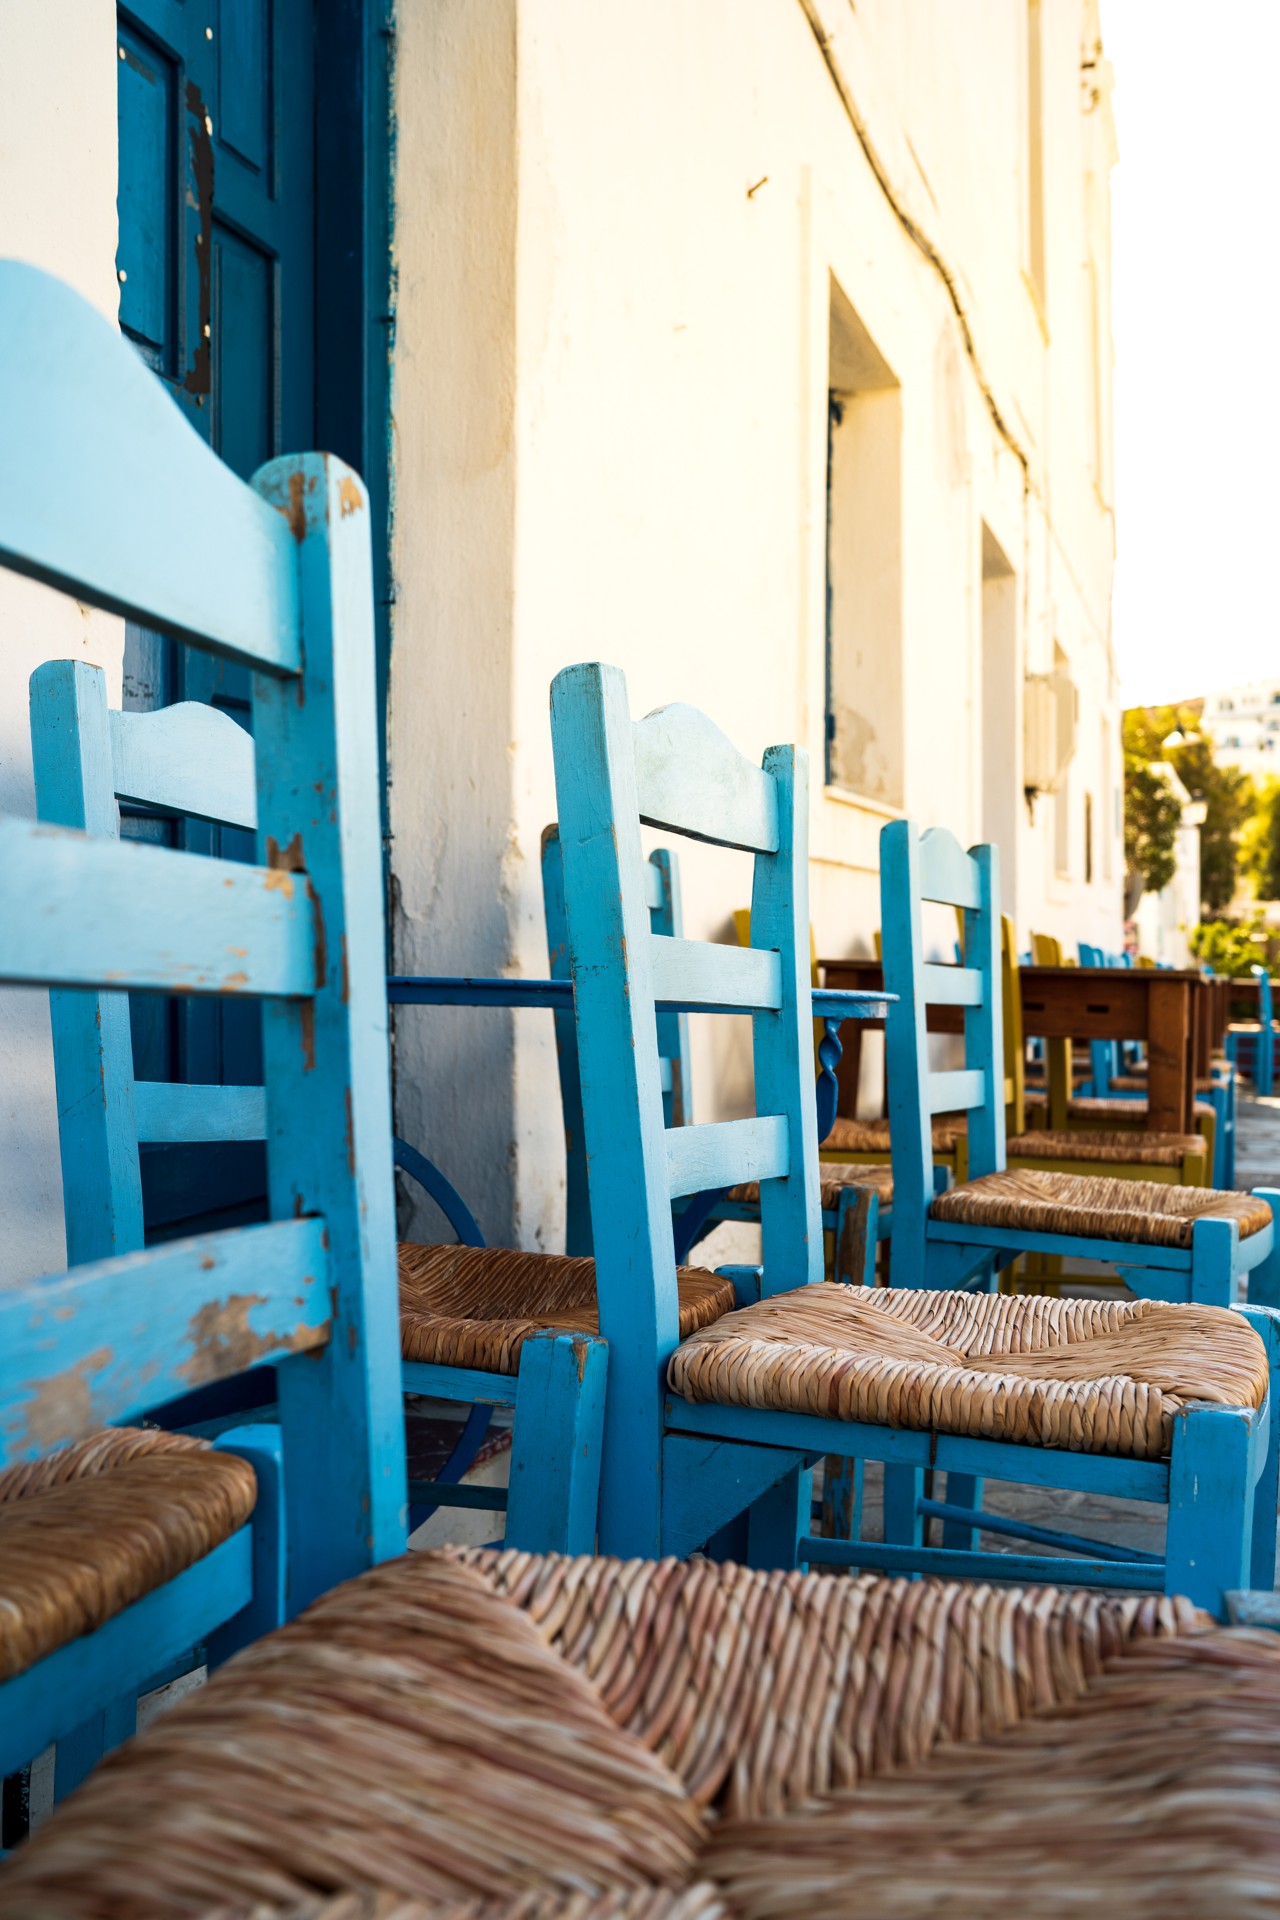 As you walk around Hora, keep a lookout for your choice of taverna or cafe